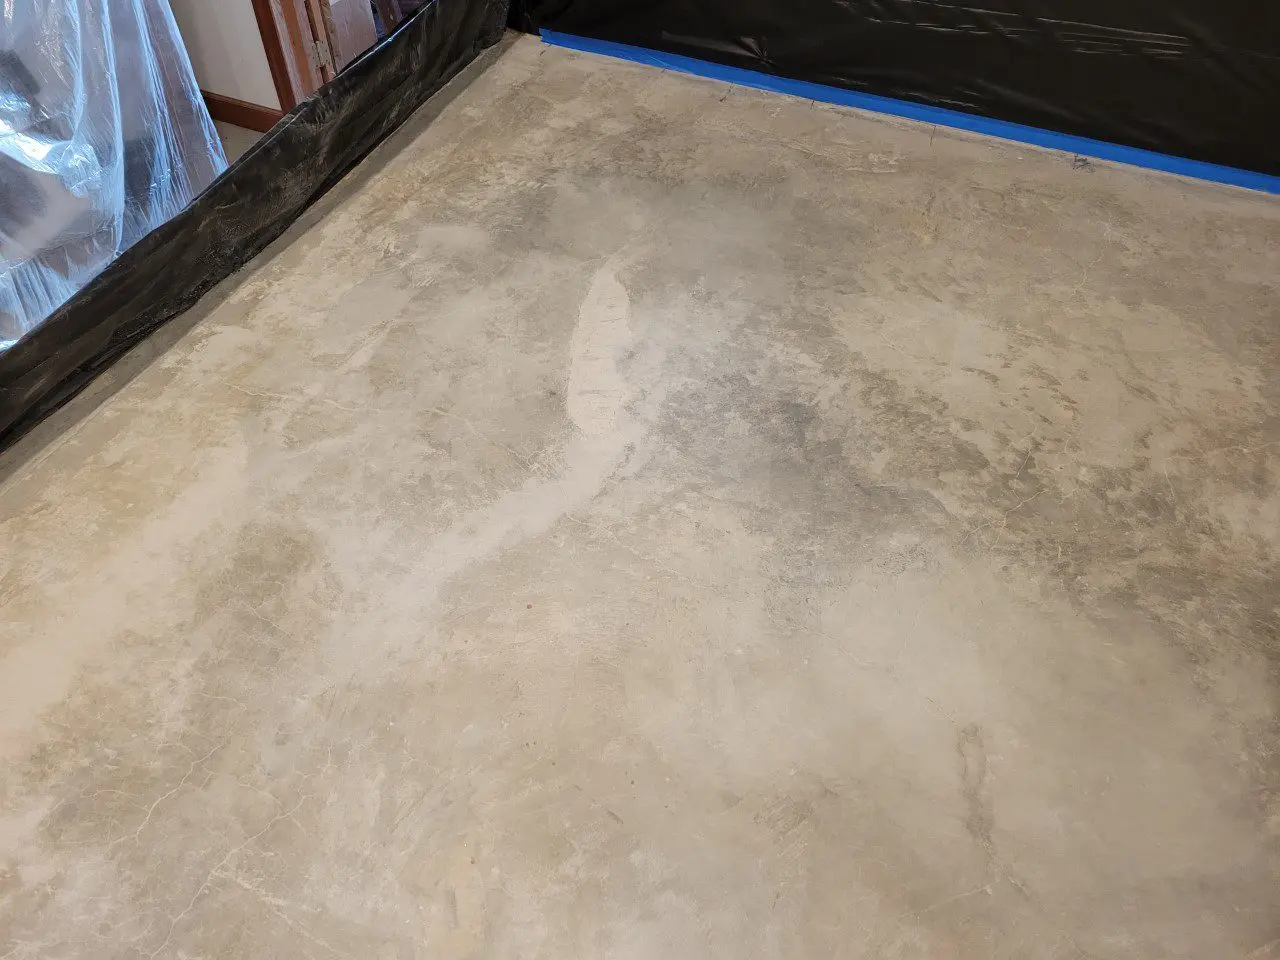 A freshly sanded and cleaned bare concrete basement floor, preparing for staining.